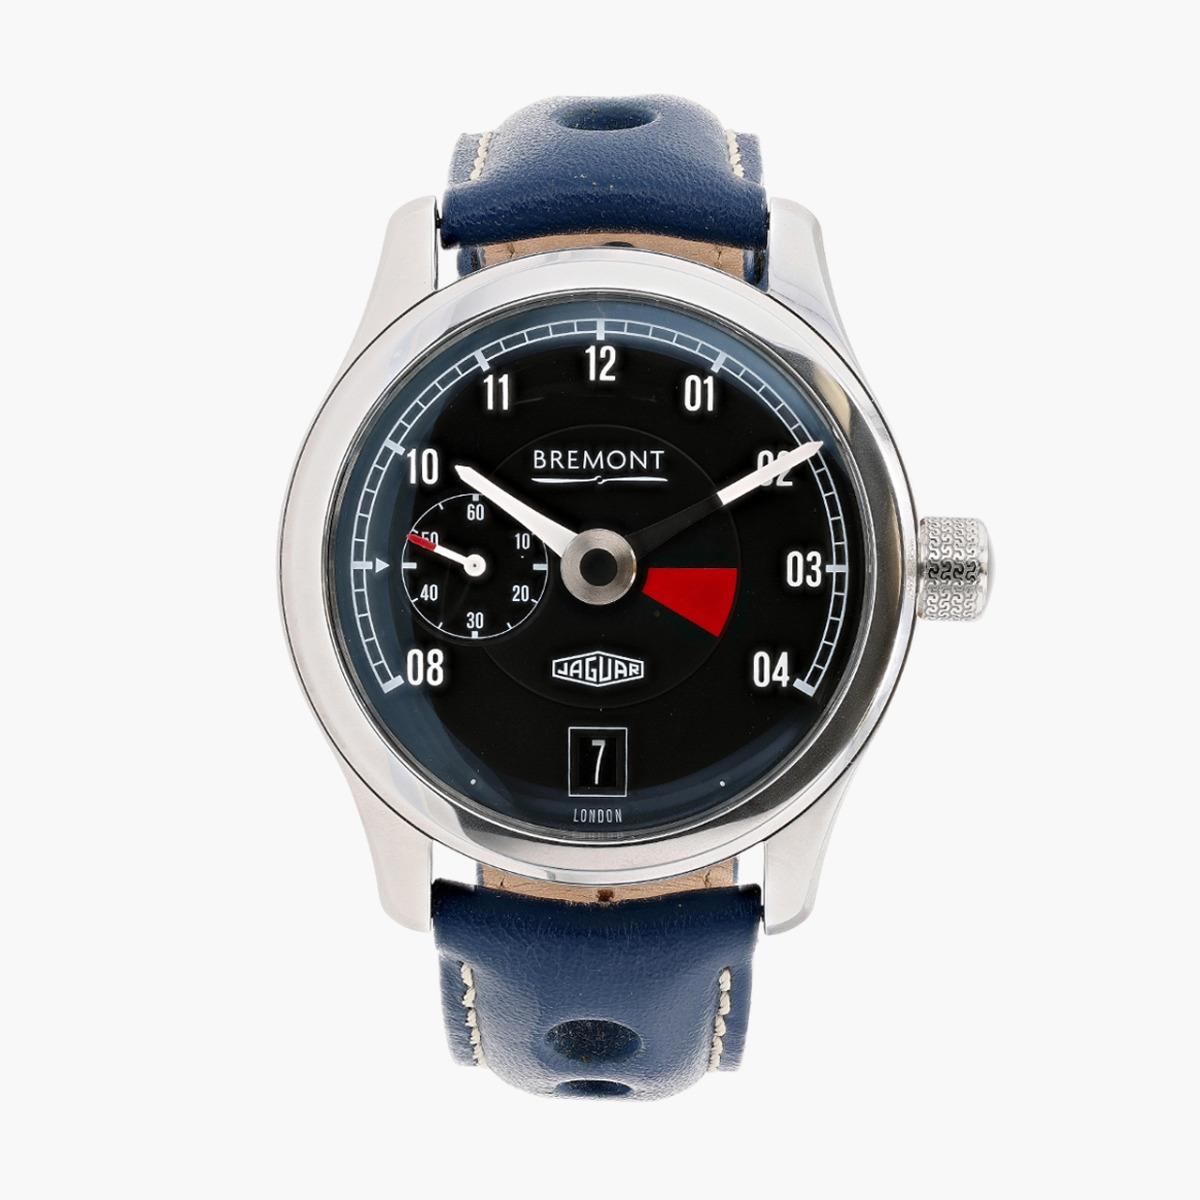 Bremont 43Mm Automatic Watch, Ref#Bj-I-Bk